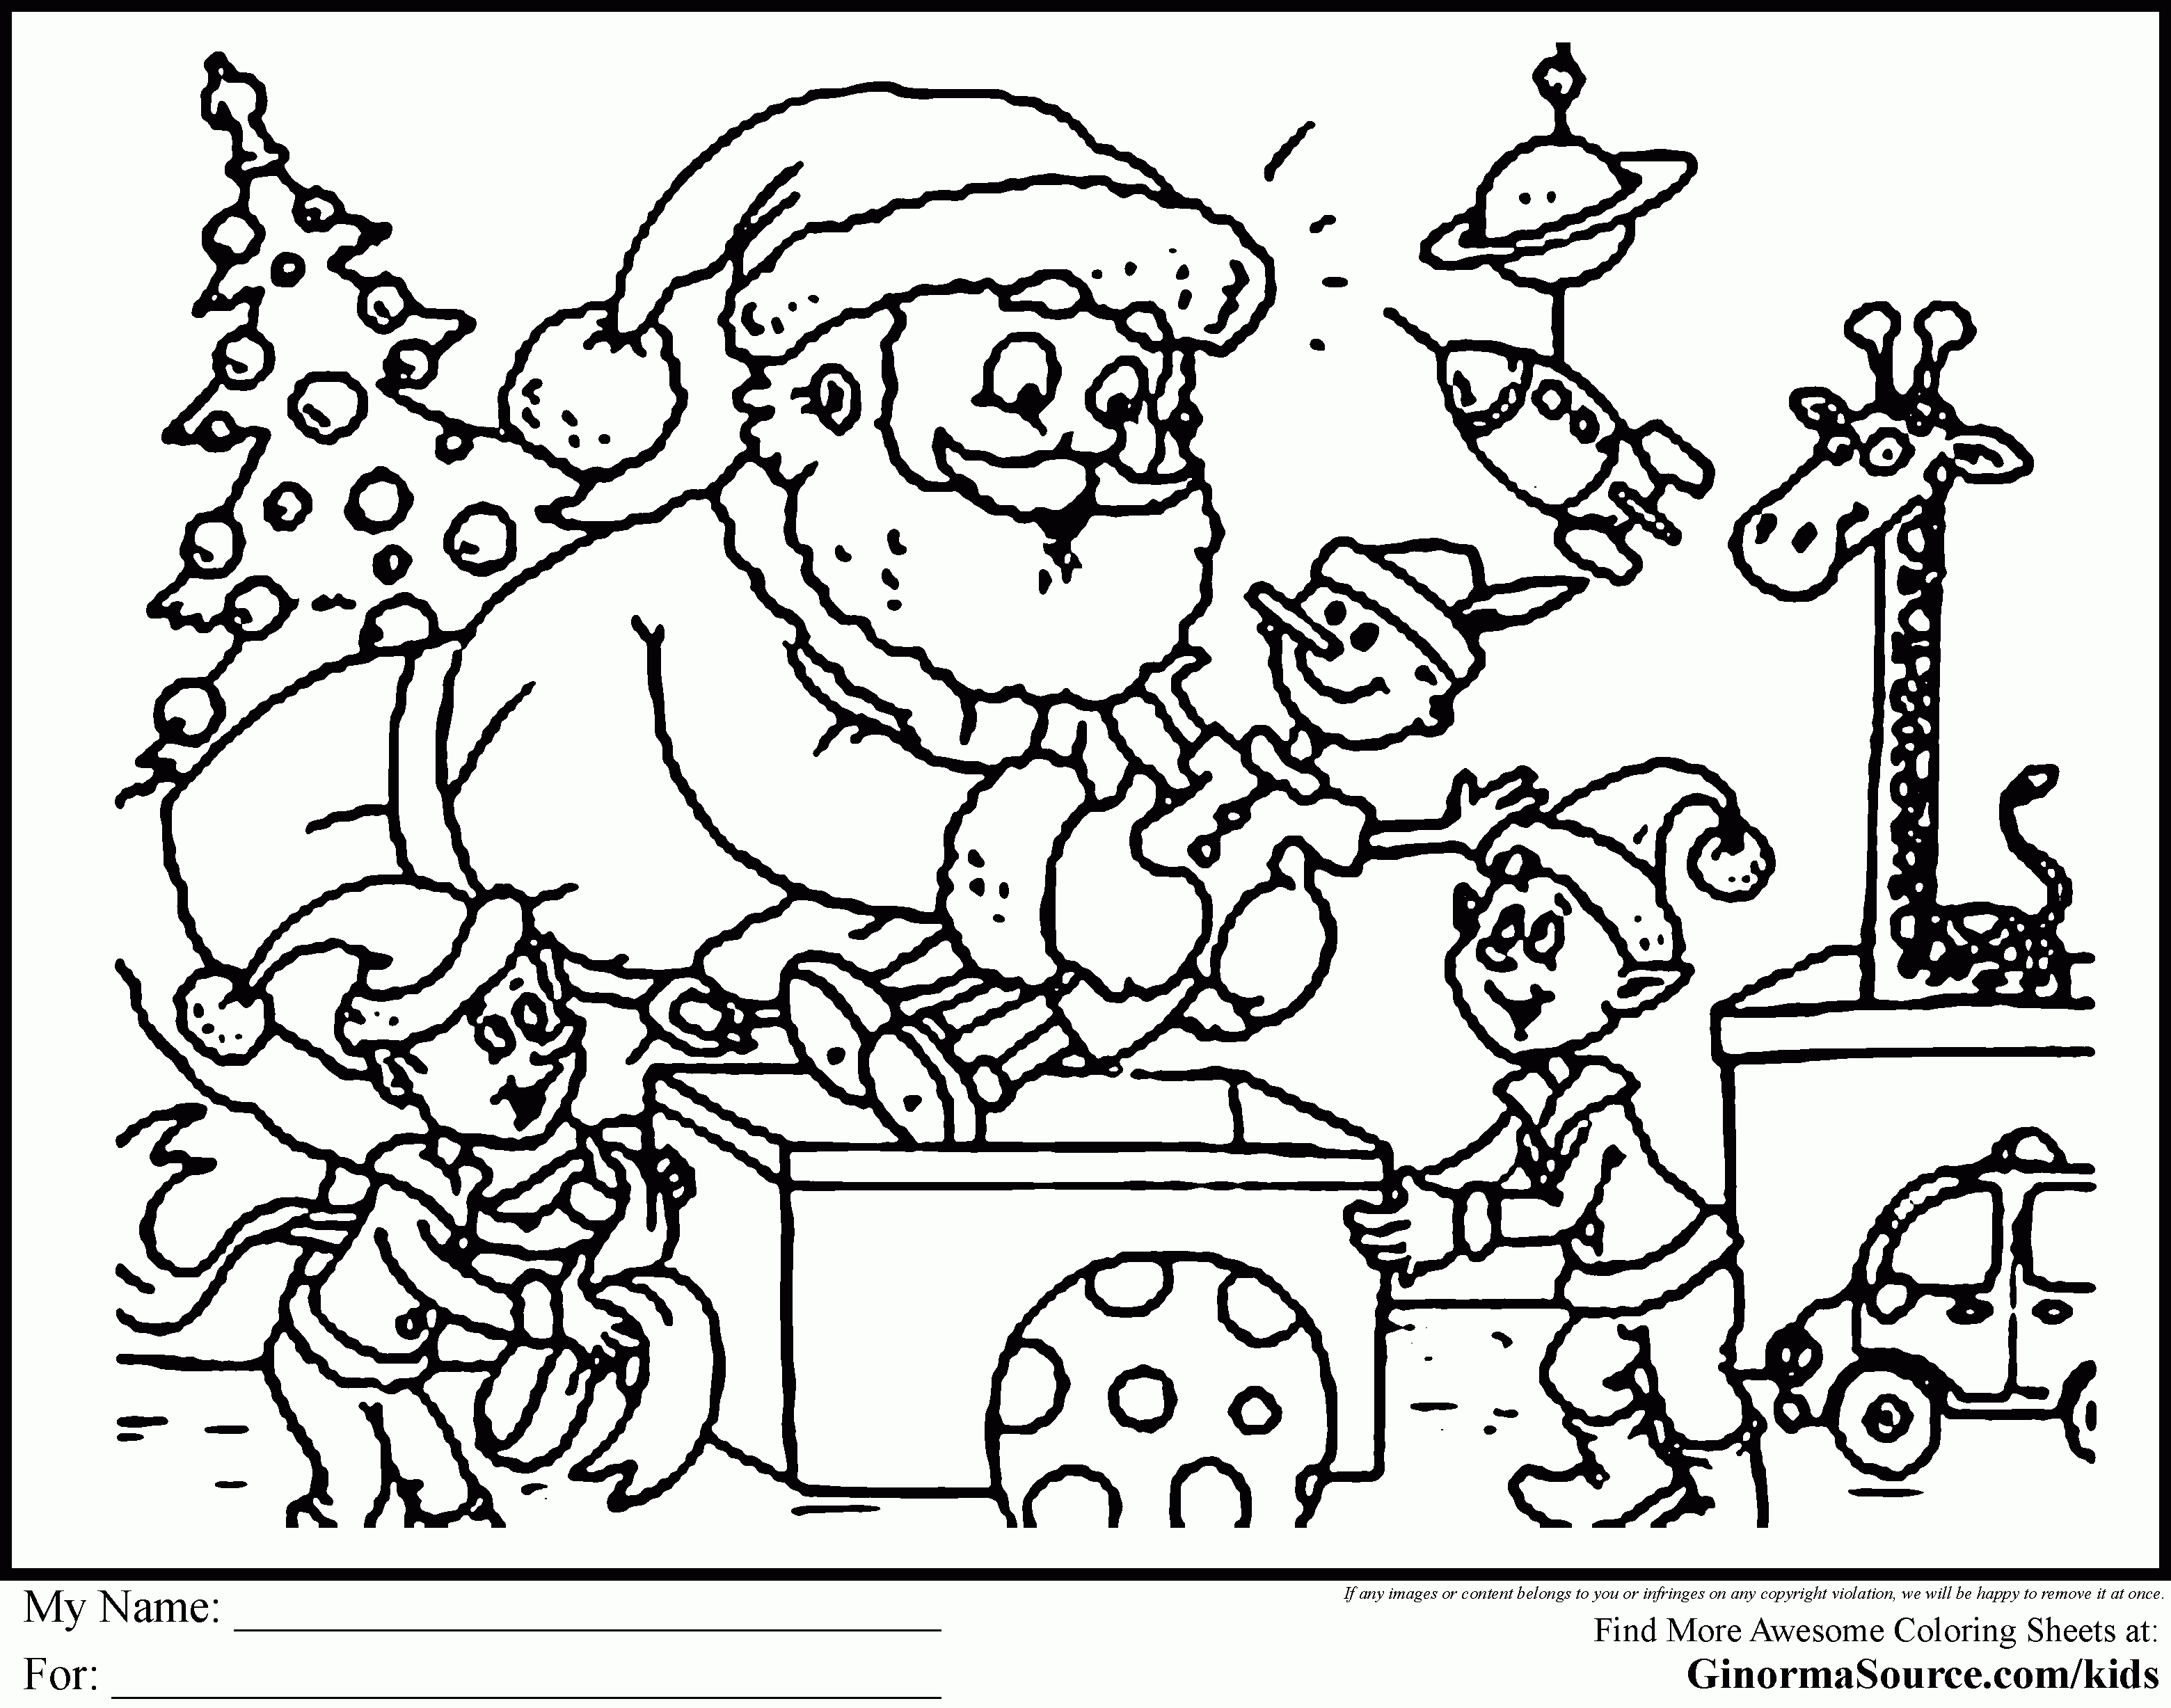 Free Printable Christmas Coloring Pages Santas Workshop | Coloring - Free Printable Christmas Coloring Pages